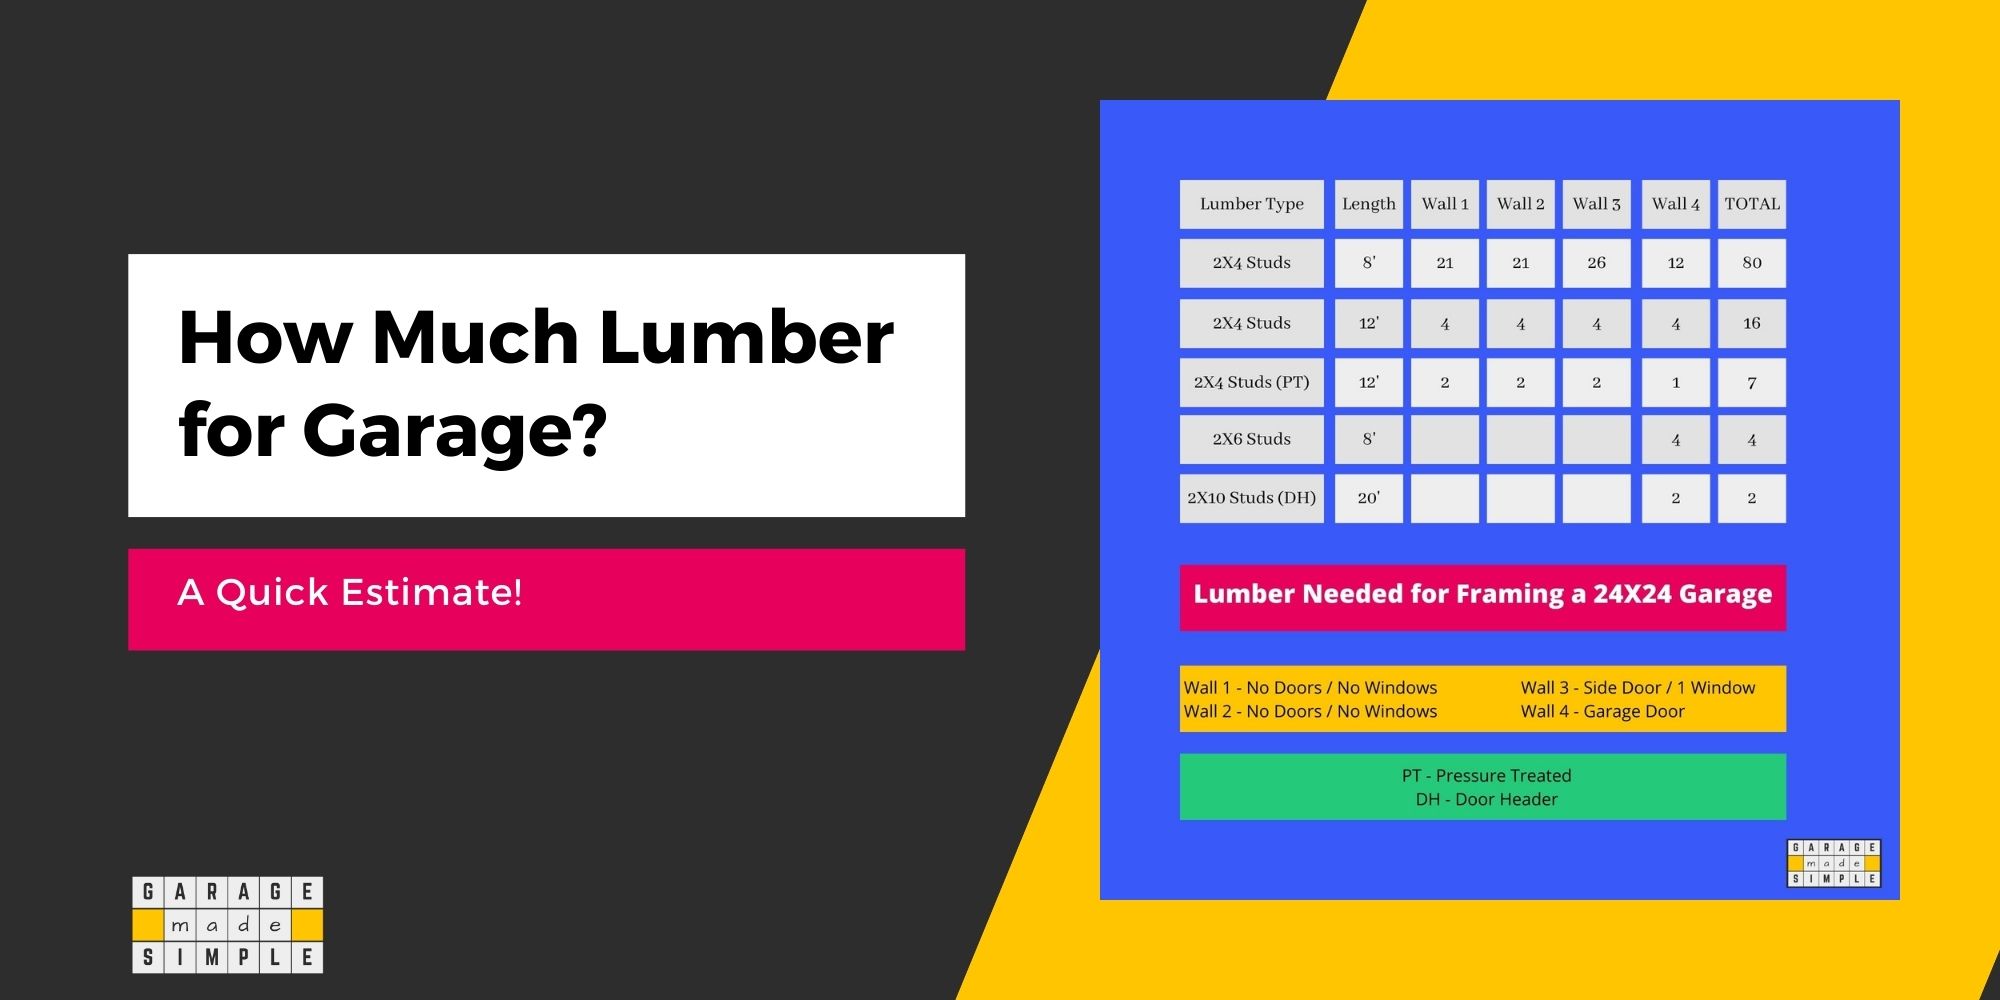 How Much Lumber Do You Need To Frame Your New Garage? (Helpful!)